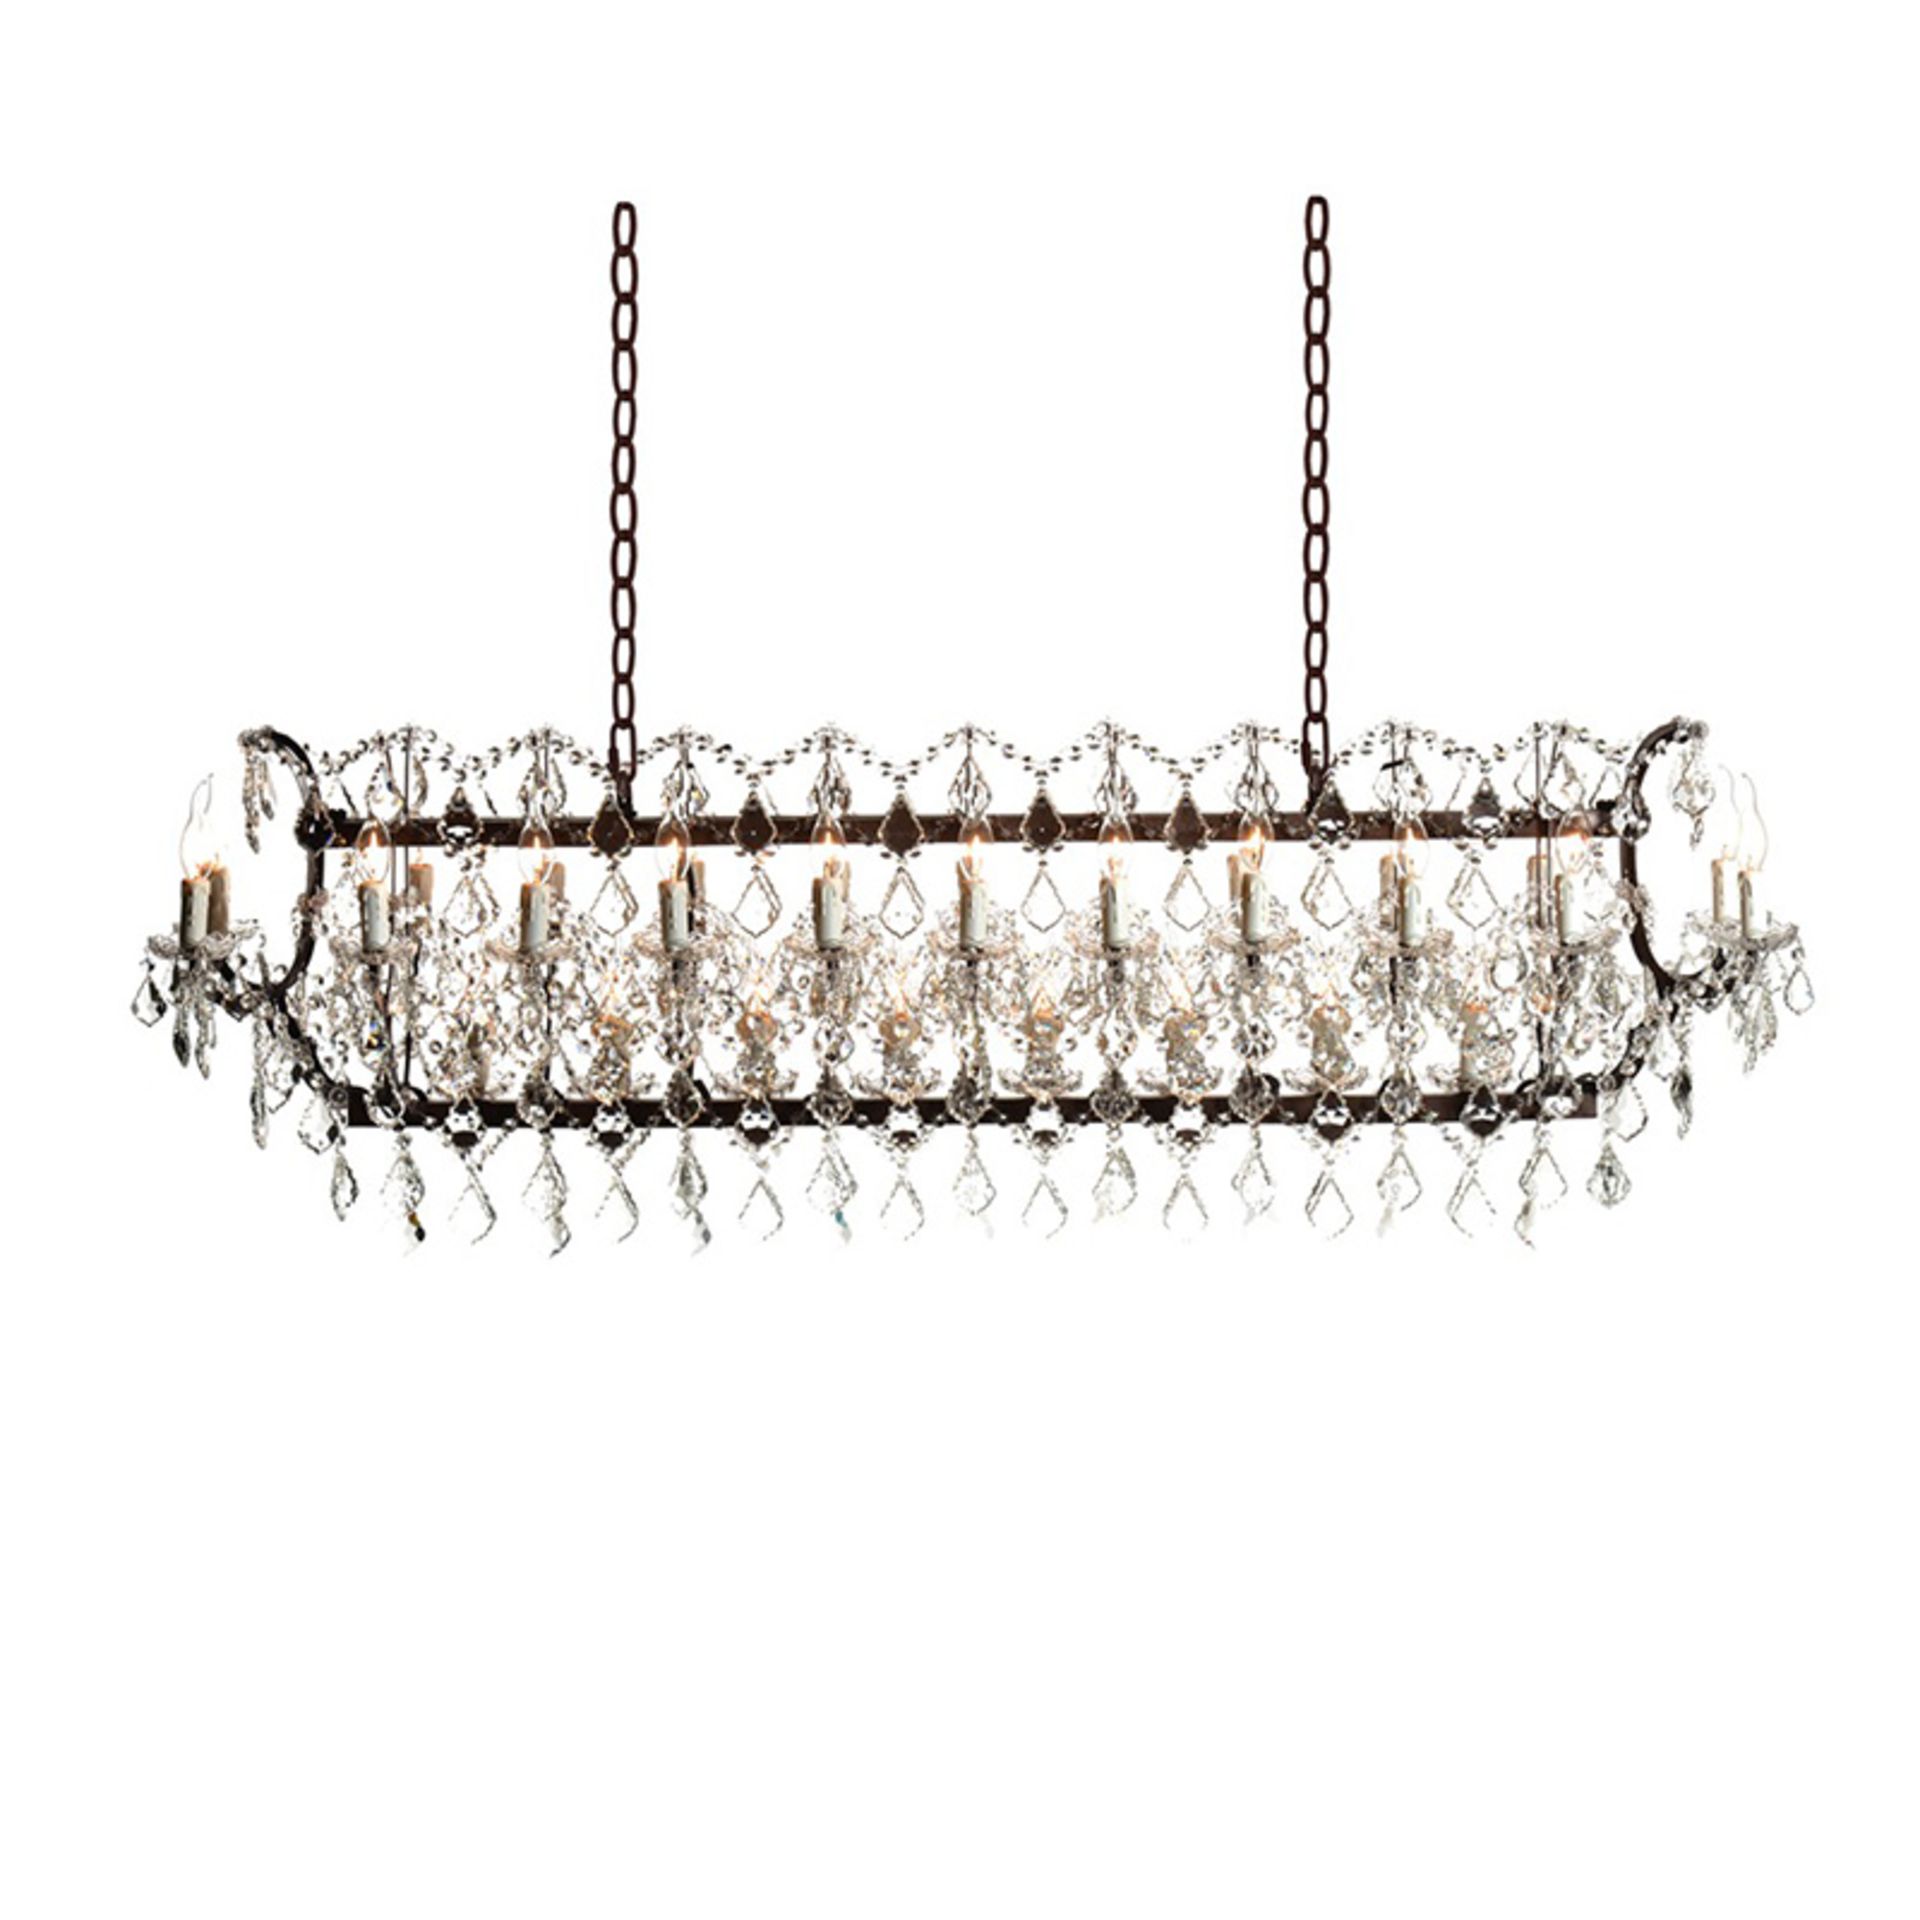 Crystal Rectangular Chandelier Antique Rust (UK) The Iconic Crystal Chandelier Is A True Testament - Image 2 of 2